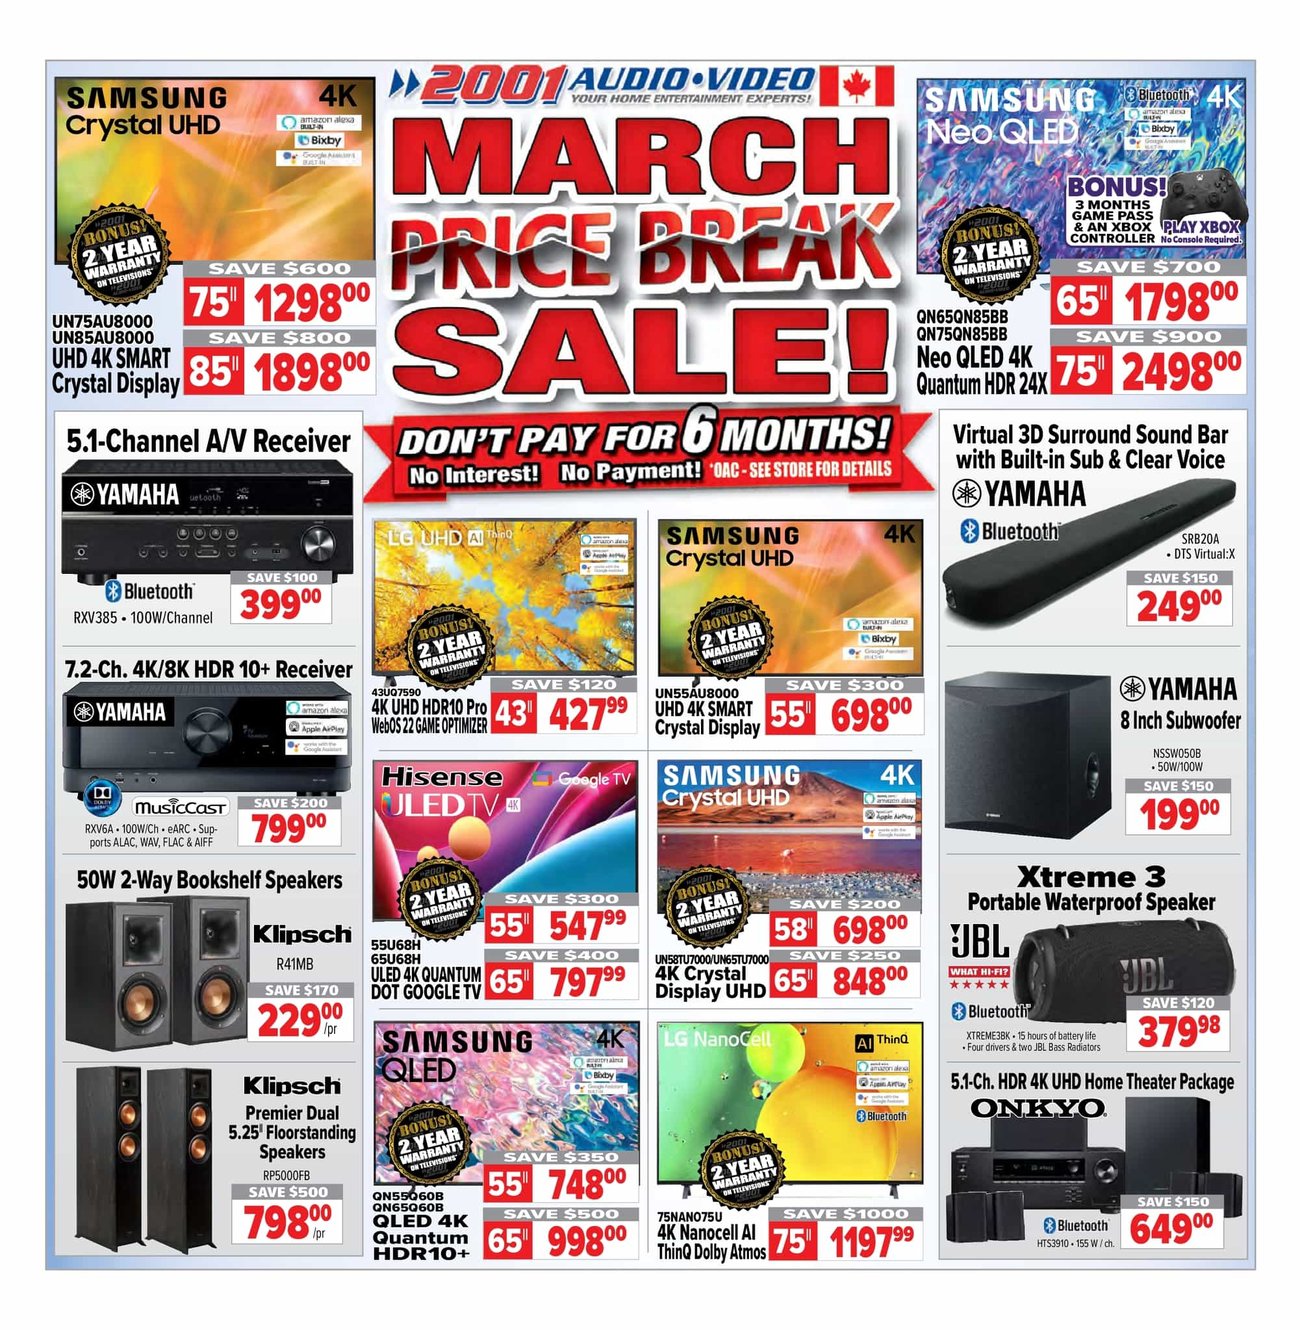 2001 Audio Video - Weekly Flyer Specials - Page 1